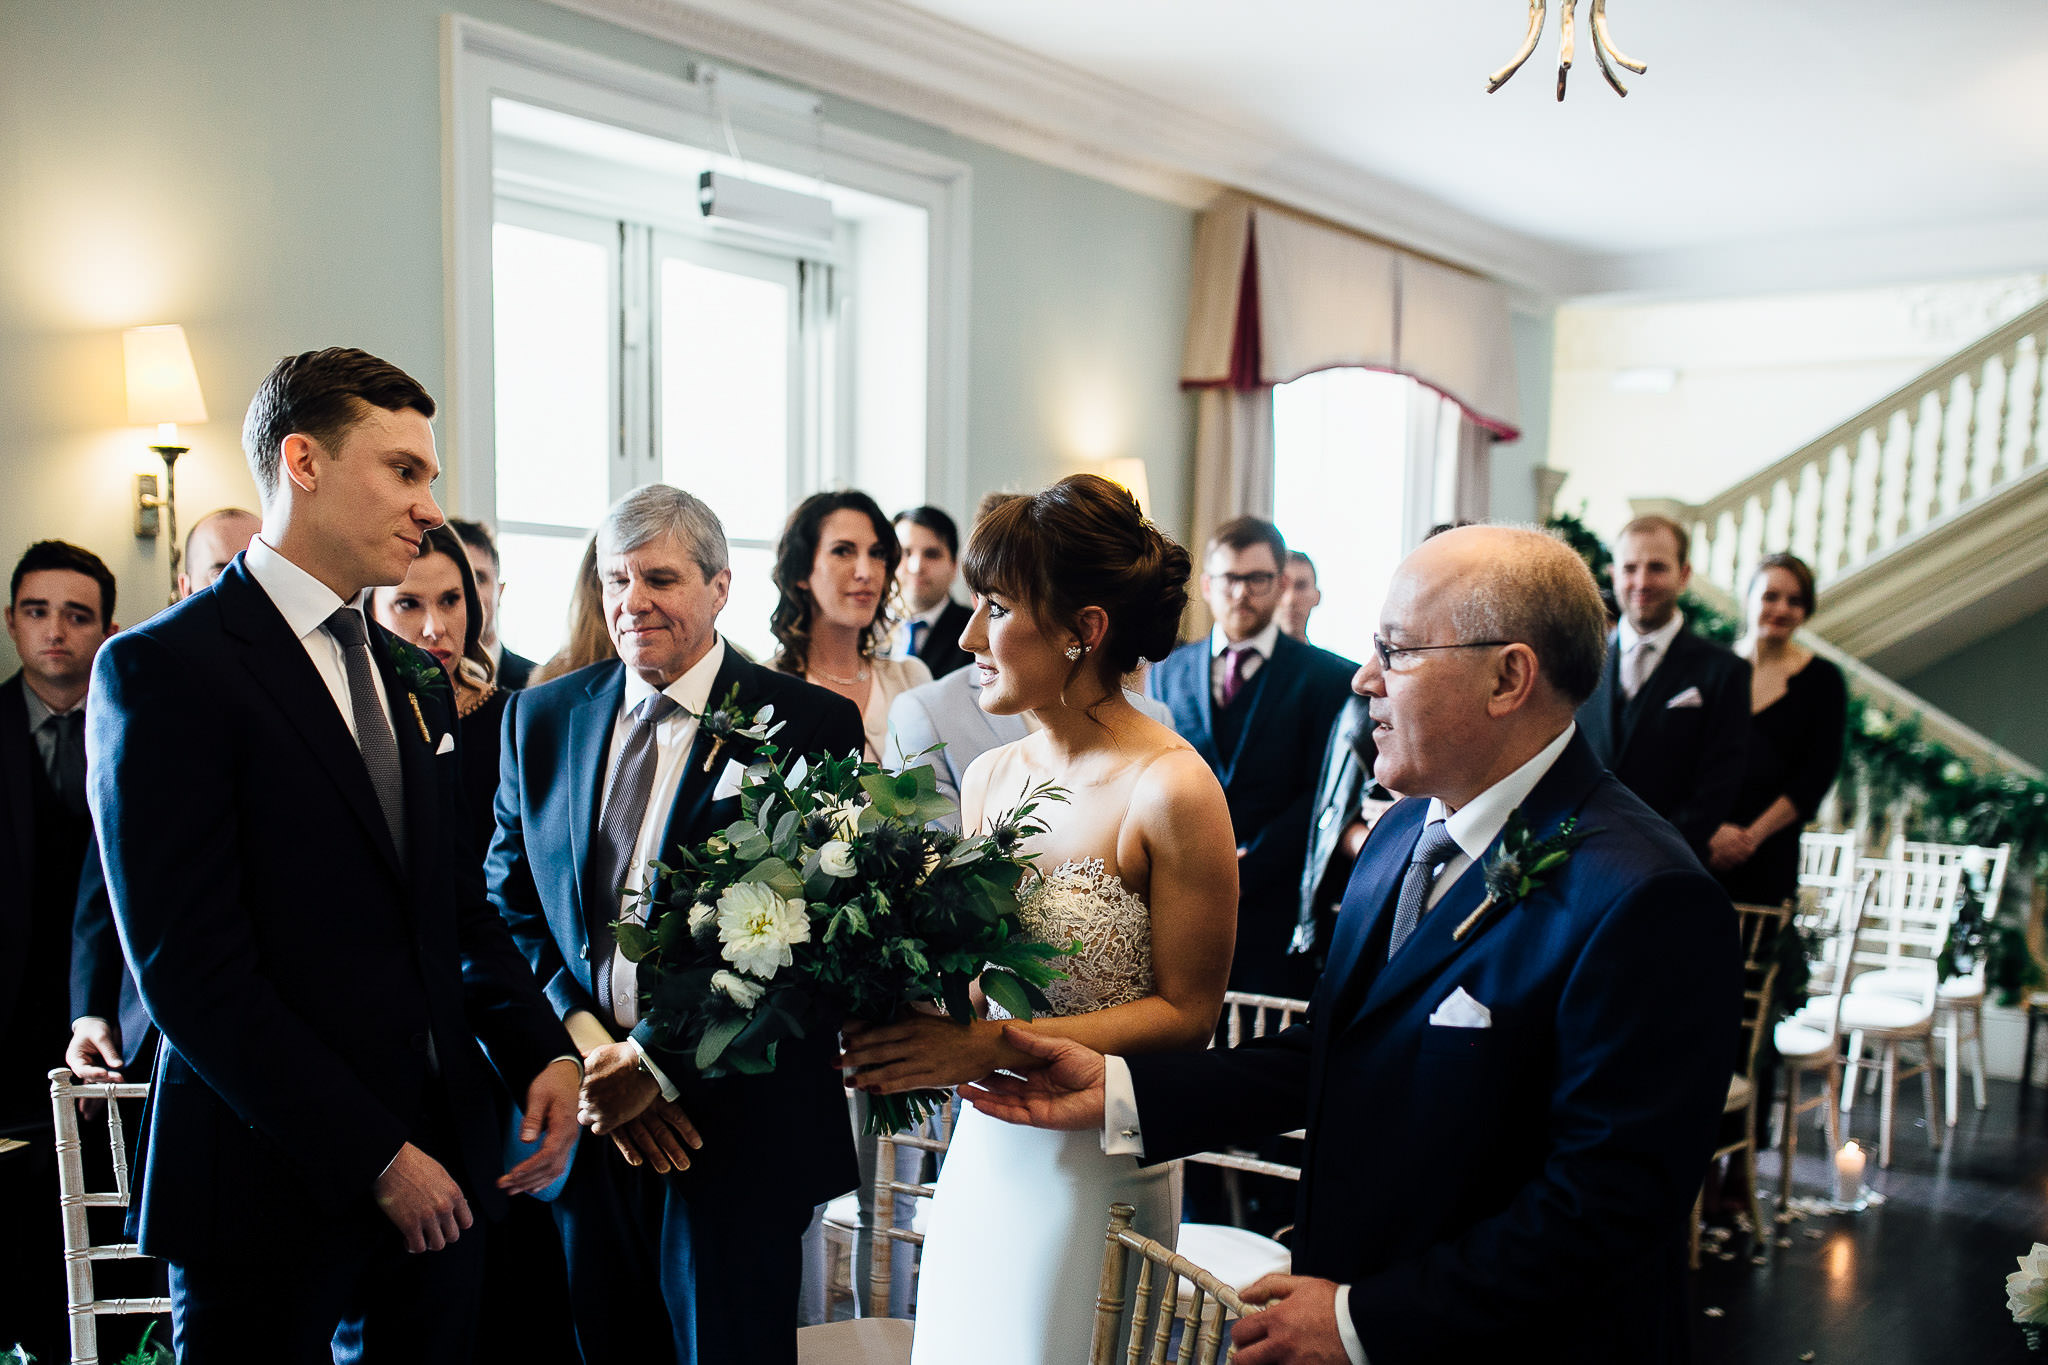 ceremony at morden hall wedding botanical theme with geometrical copper details